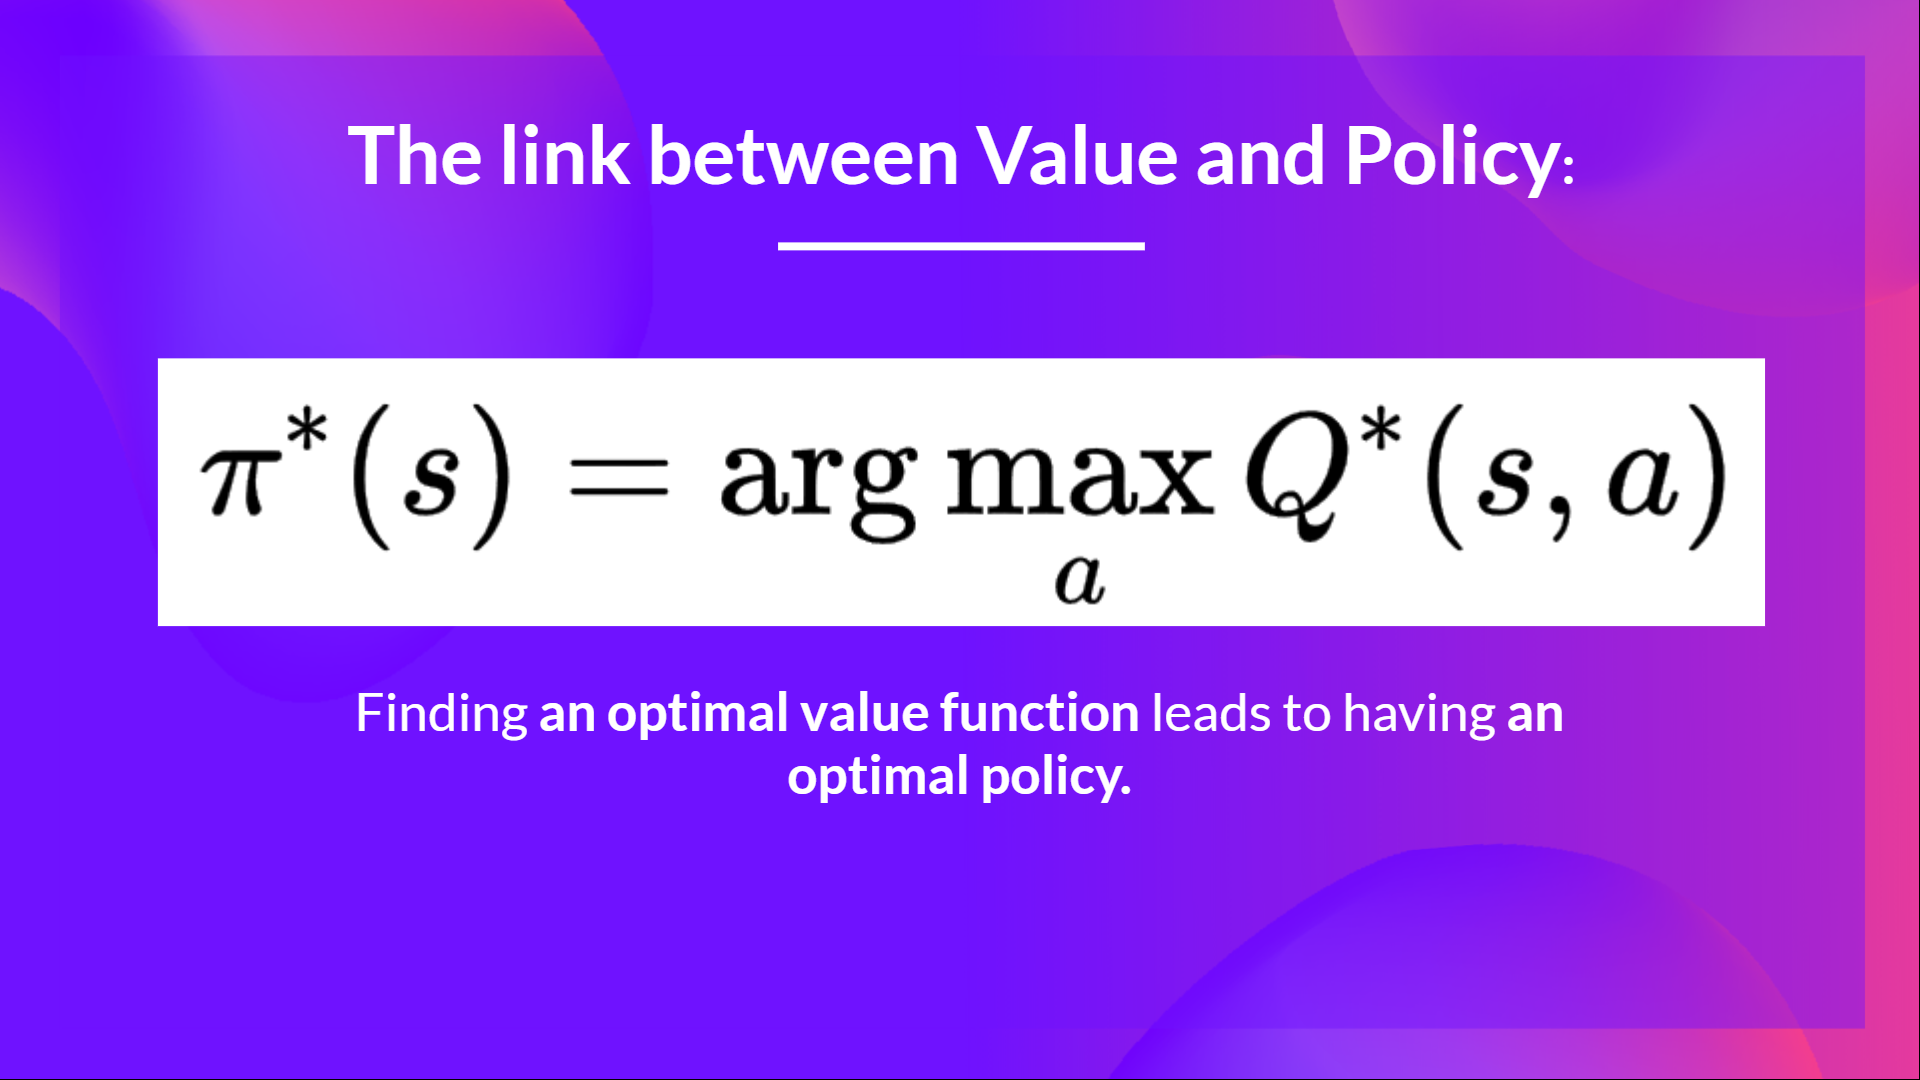 Link between value and policy